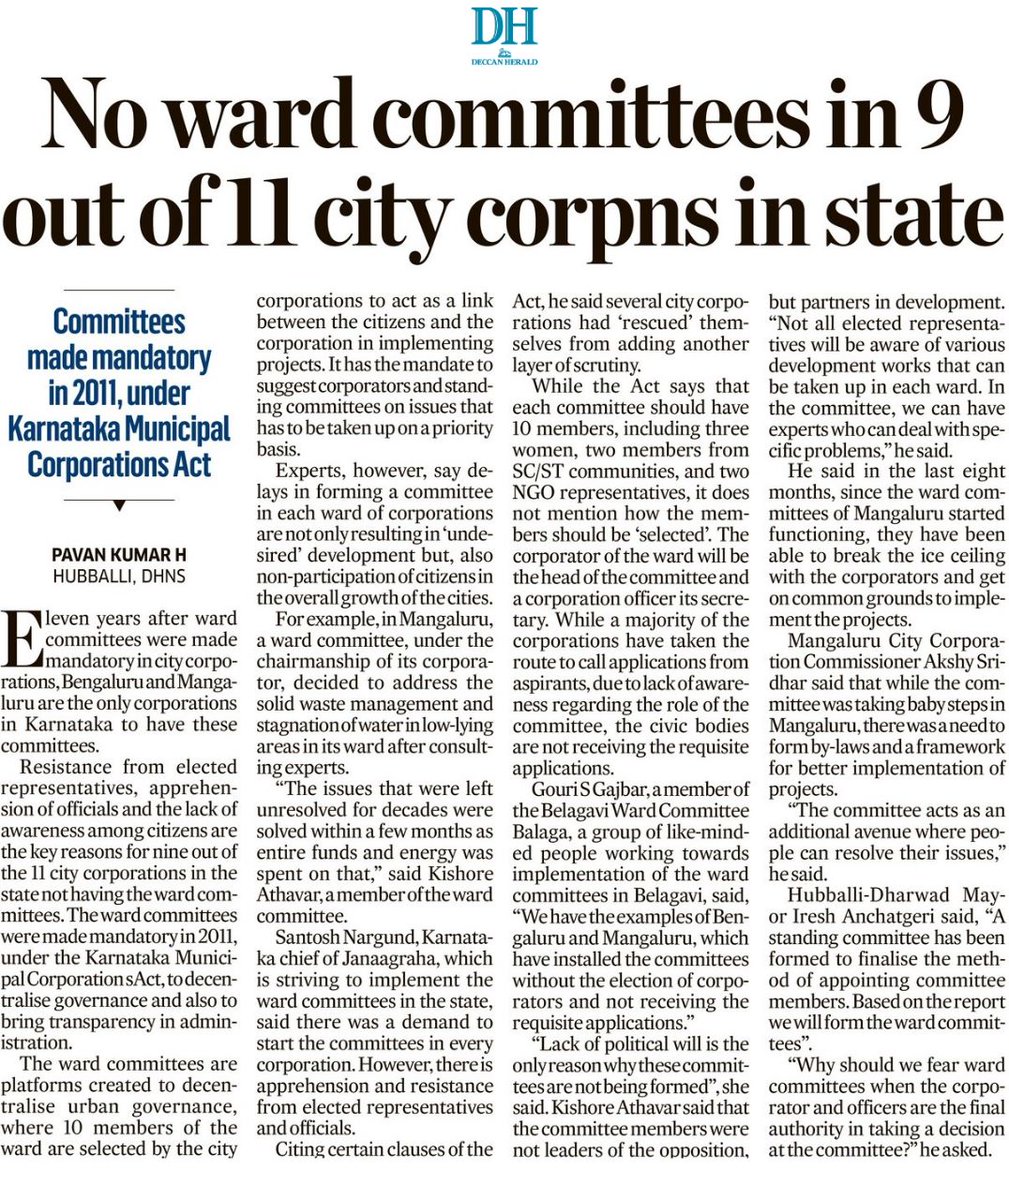 In 2011, the Karnataka legislature passed a law to make Citizens' Ward Committees mandatory in all city corporations of d state. In 11 yrs, #wardcommittees are formed in only 2 of the 11 city corporations of d state. Citizens waiting @UDDKarnataka @CMofKarnataka #wardsamitibalaga